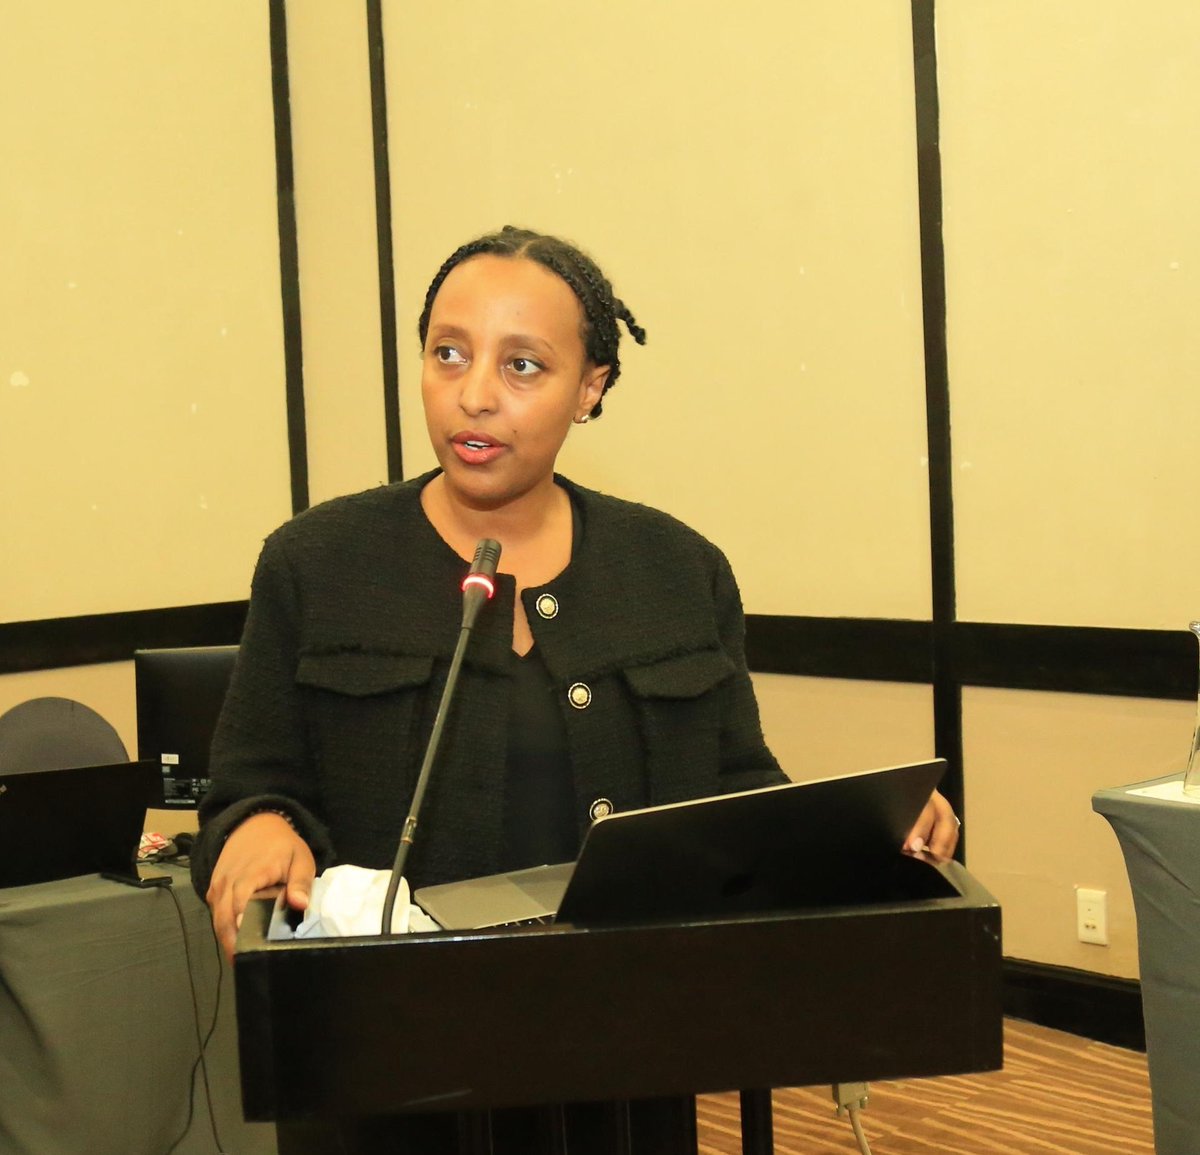 Makda Tessema highlights the role #ACERWC can play as the new chairperson of the African Governance Platform. ACERWC will lead consultations on the proposal for the AU Theme of the Year on Democracy, Governance and Human Rights 2026. #ACERWC43